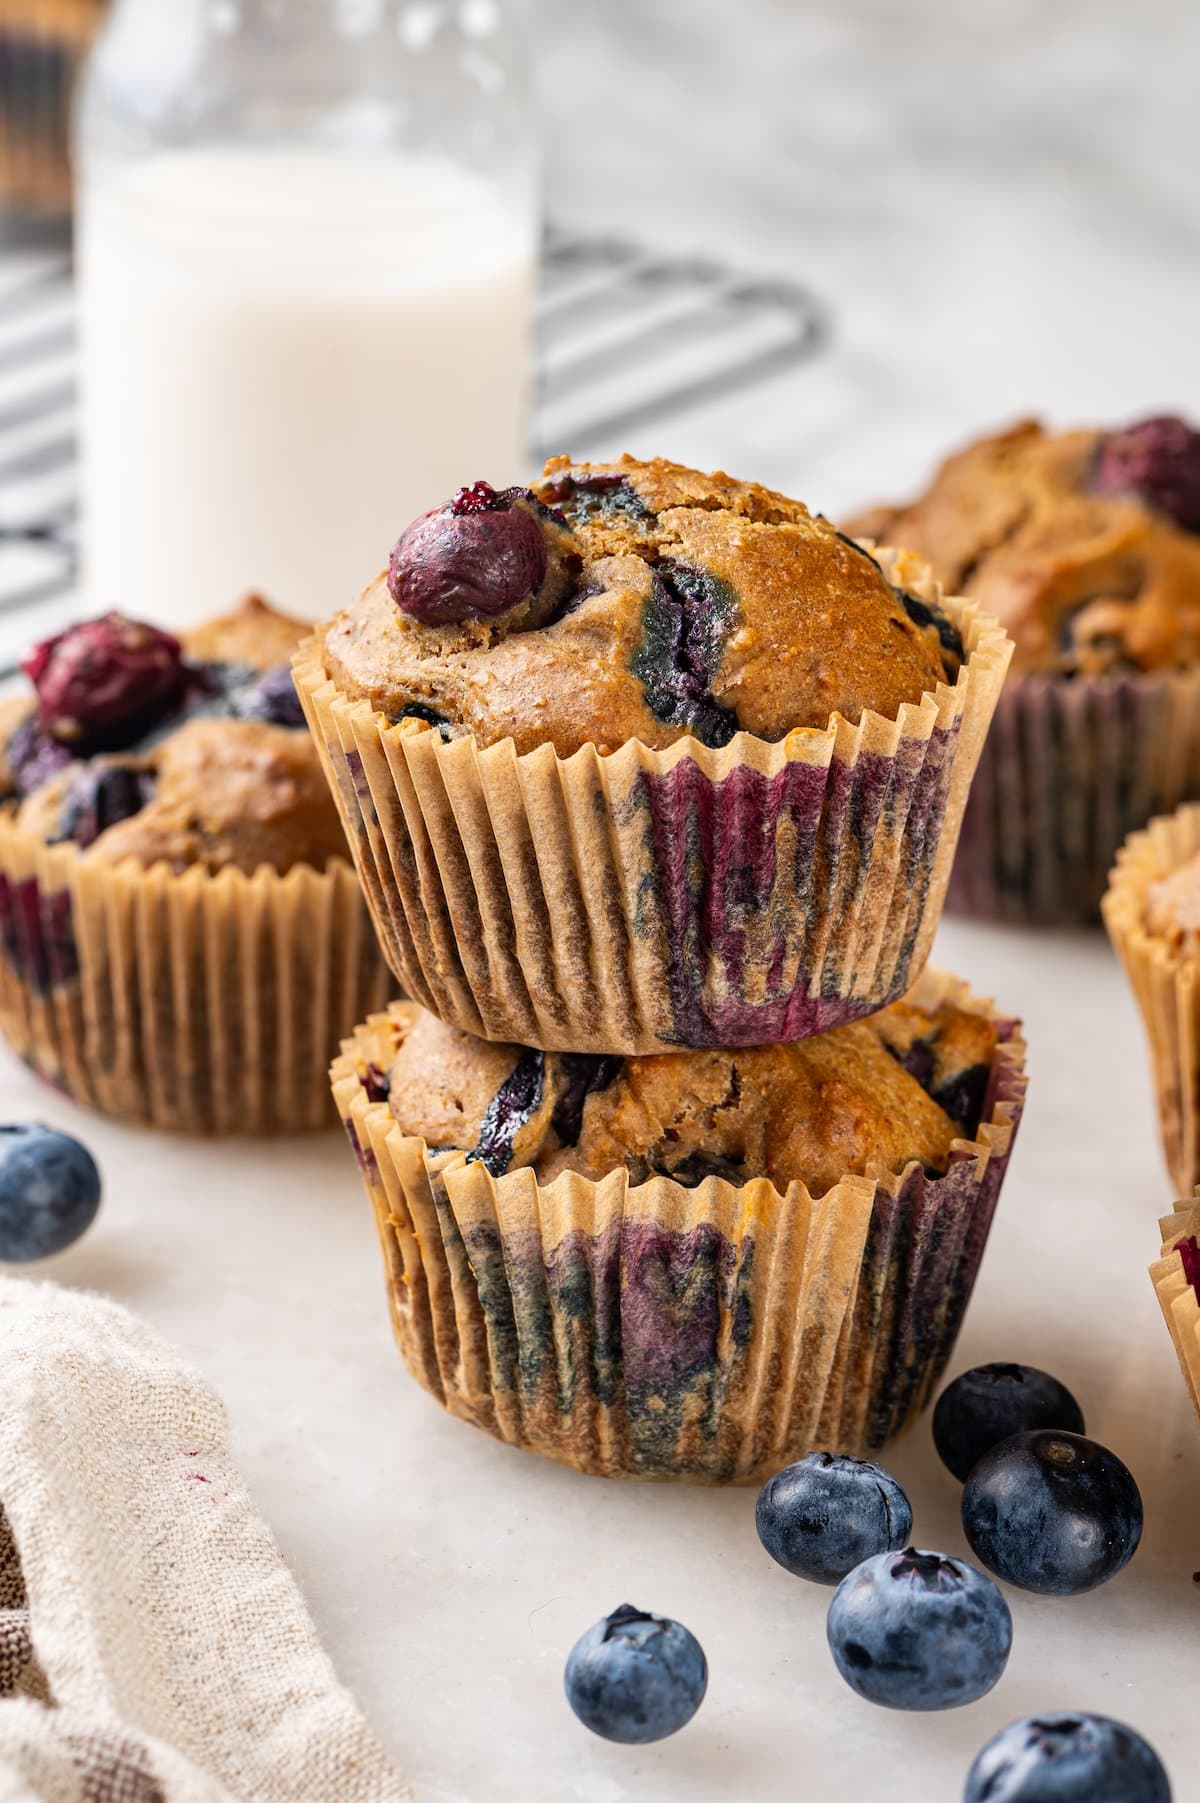 Stack of 2 blueberry muffins with additional muffins and jug of milk in background